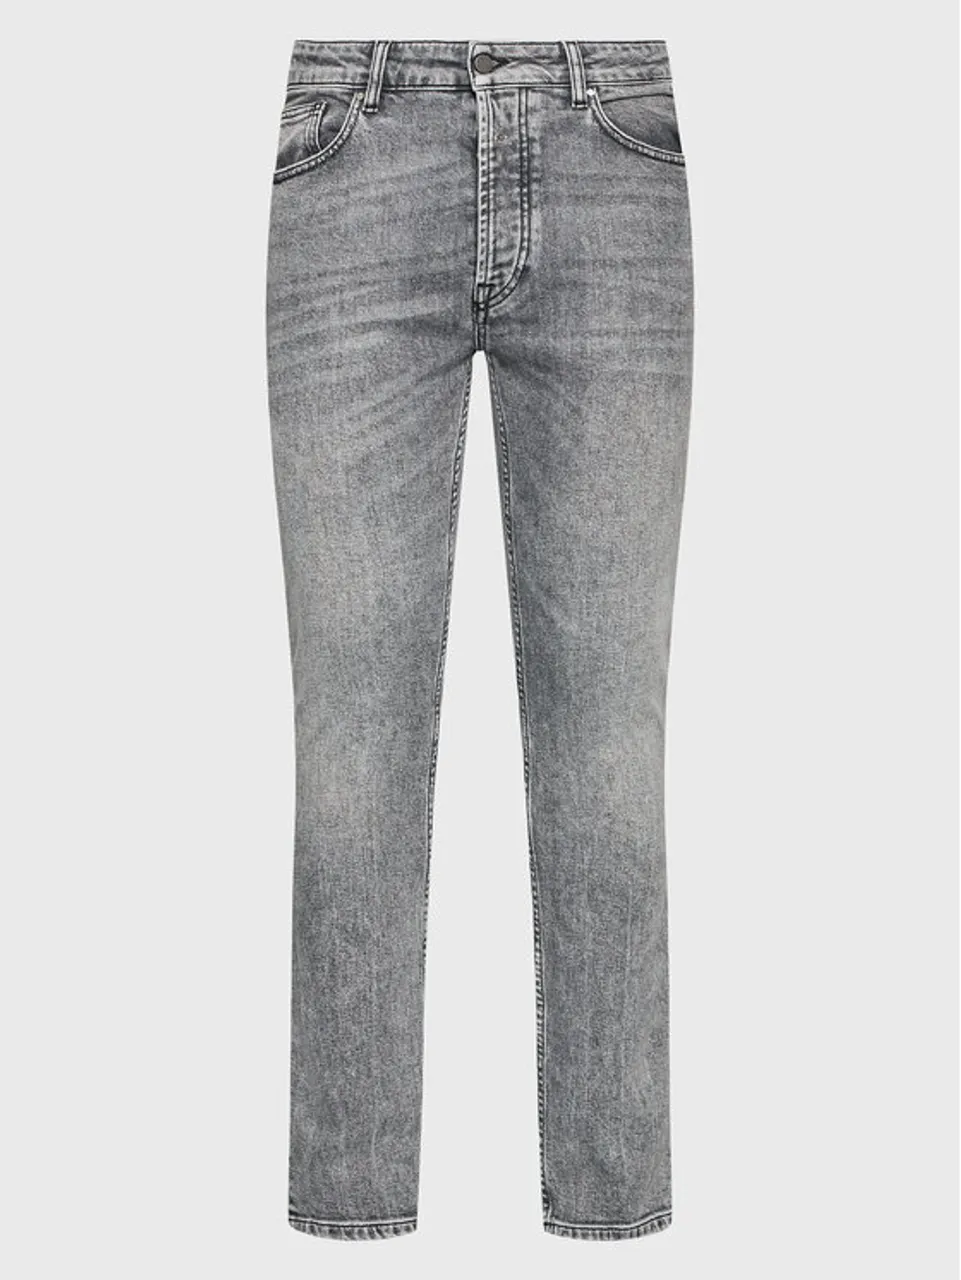 Young Poets Society Jeans Morten 107700 Grau Slim Fit